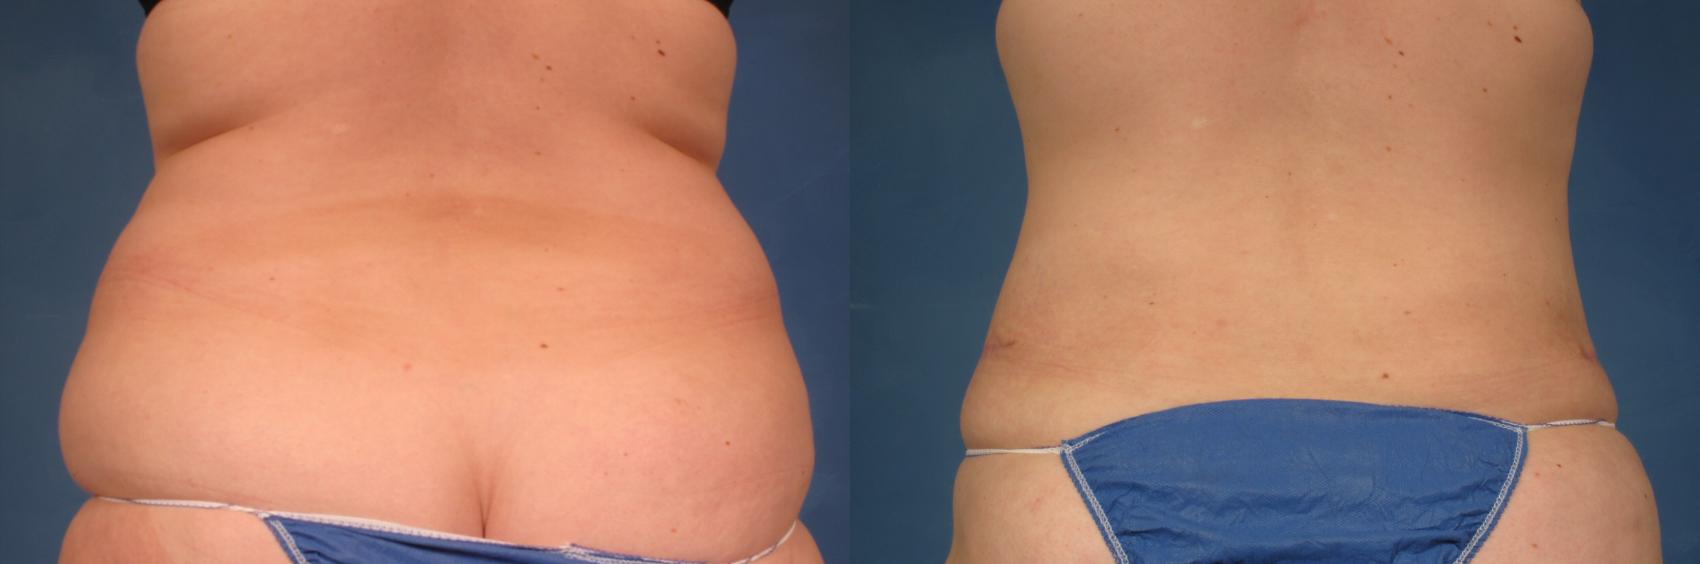 Tummy Tuck Before and After Pictures Case 234 | Naples and Ft. Myers, FL |  Kent V. Hasen, MD: Aesthetic Plastic Surgery & Med Spa of Naples